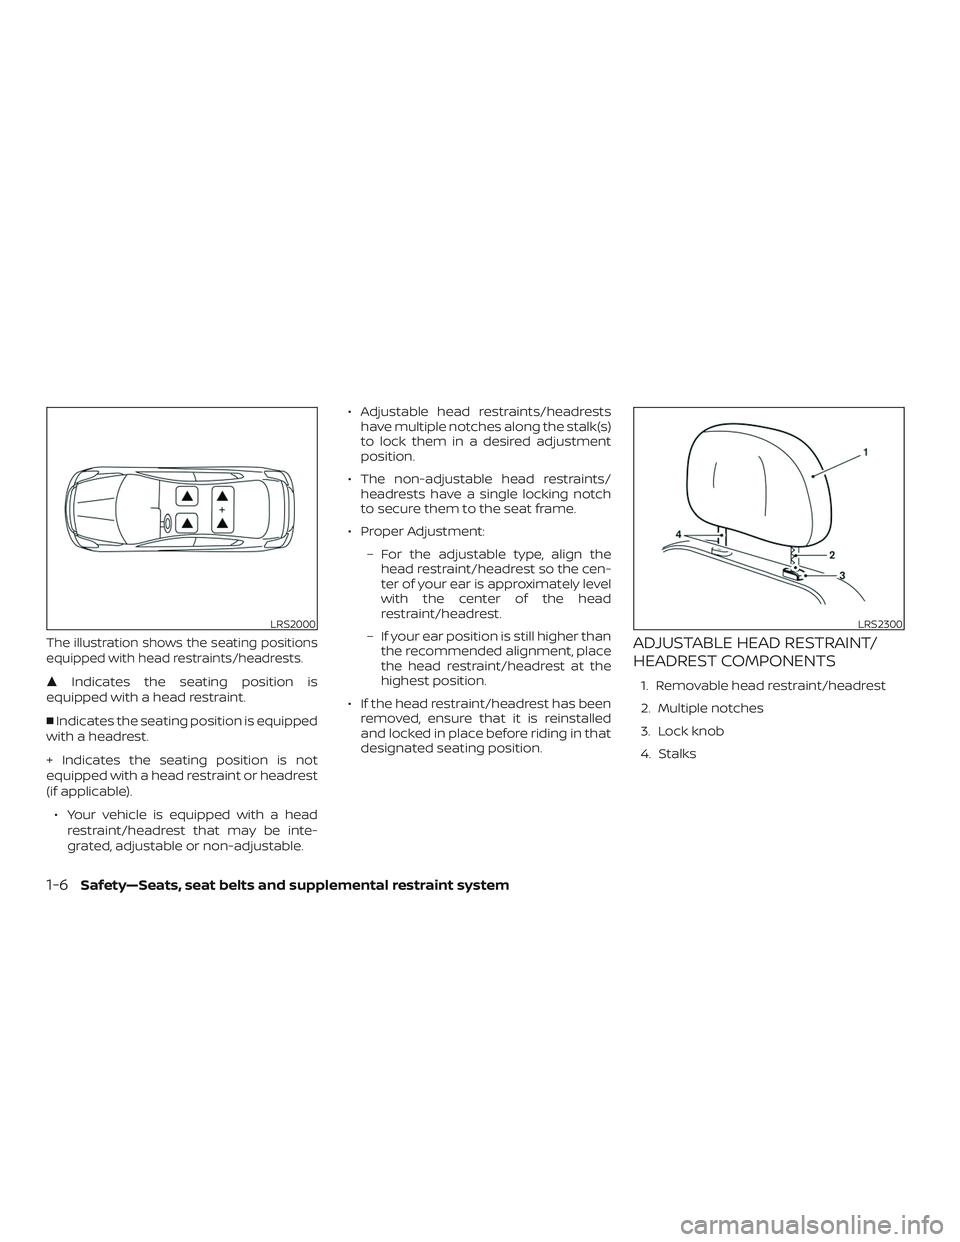 NISSAN VERSA SEDAN 2018  Owner´s Manual The illustration shows the seating positions
equipped with head restraints/headrests.
Indicates the seating position is
equipped with a head restraint.
Indicates the seating position is equipped
wit